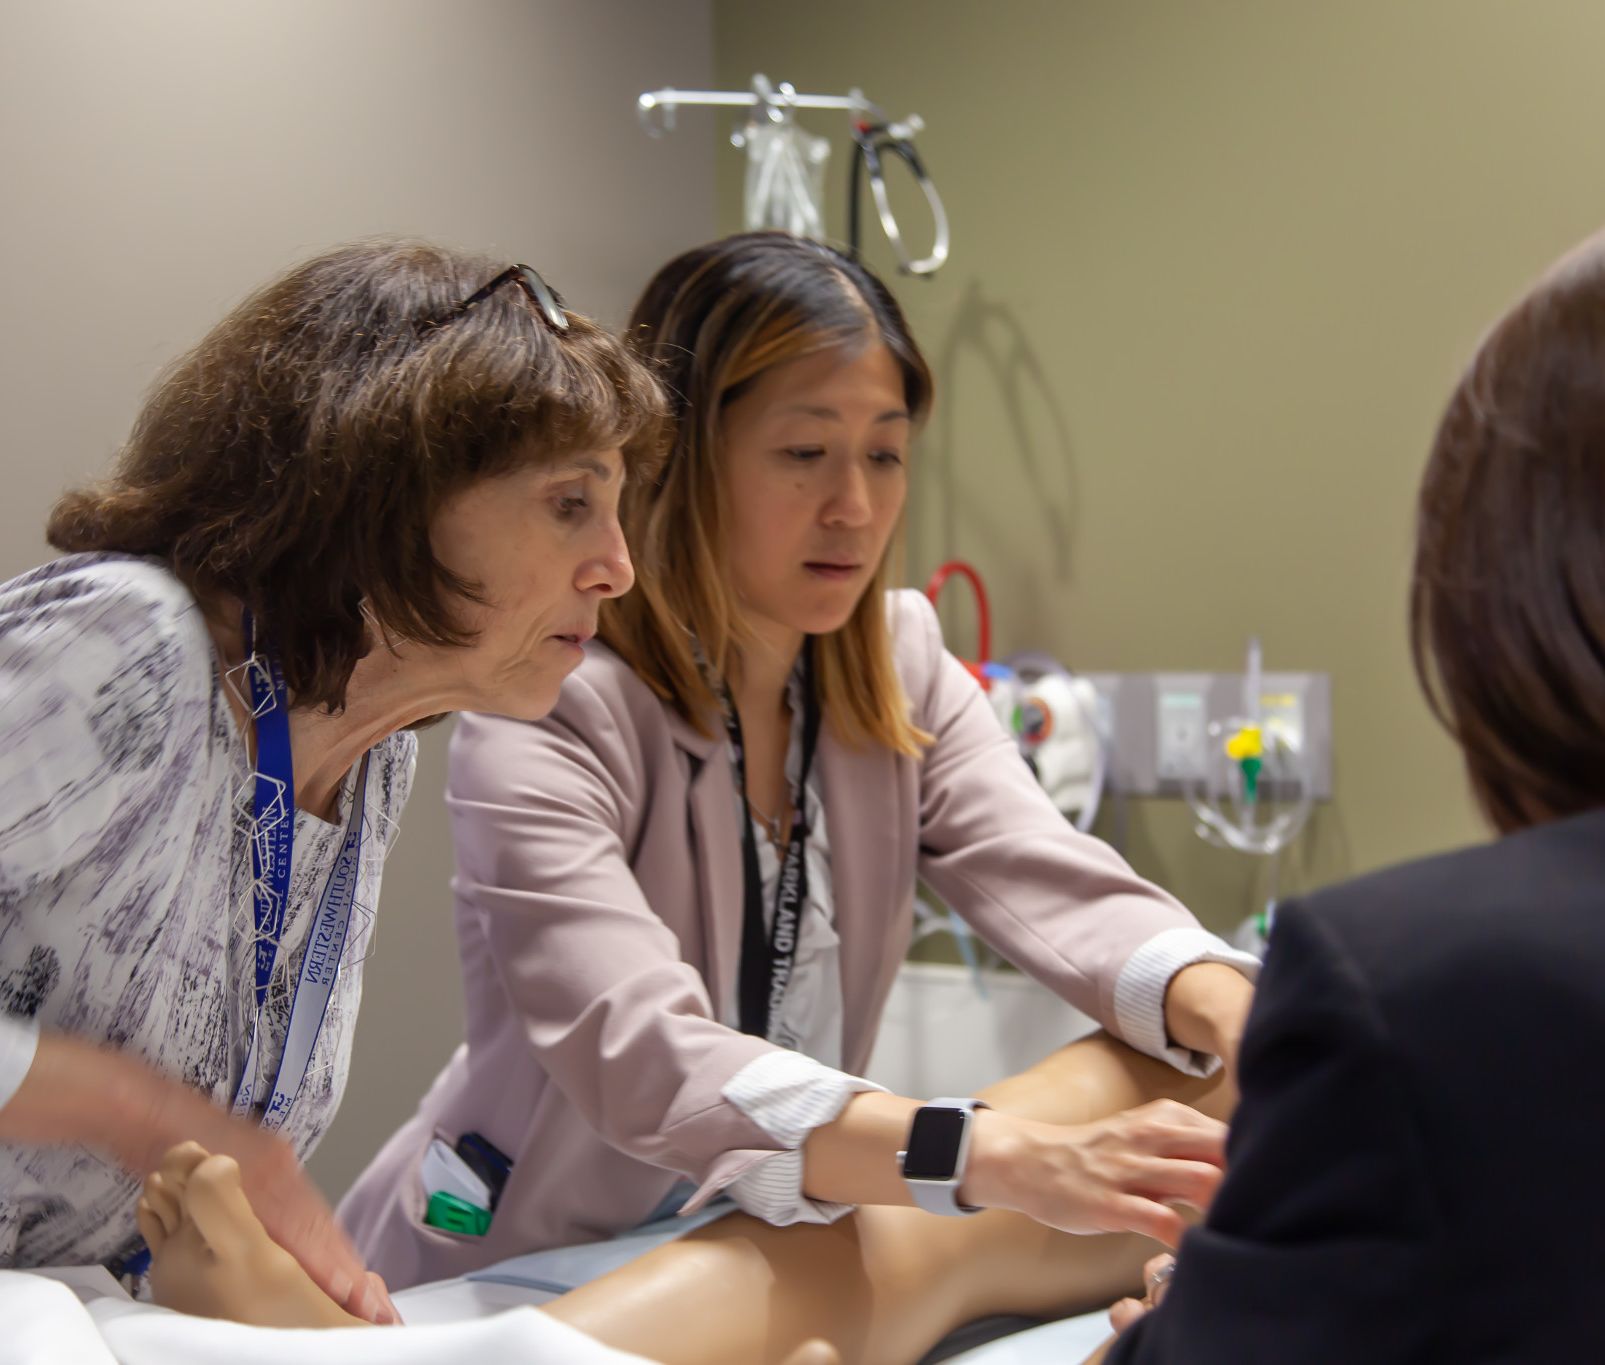 Dr. Caroline Park led a study finding complex simulated surgery training can help trainees and their care teams shave critical minutes off lifesaving trauma interventions in real care settings.